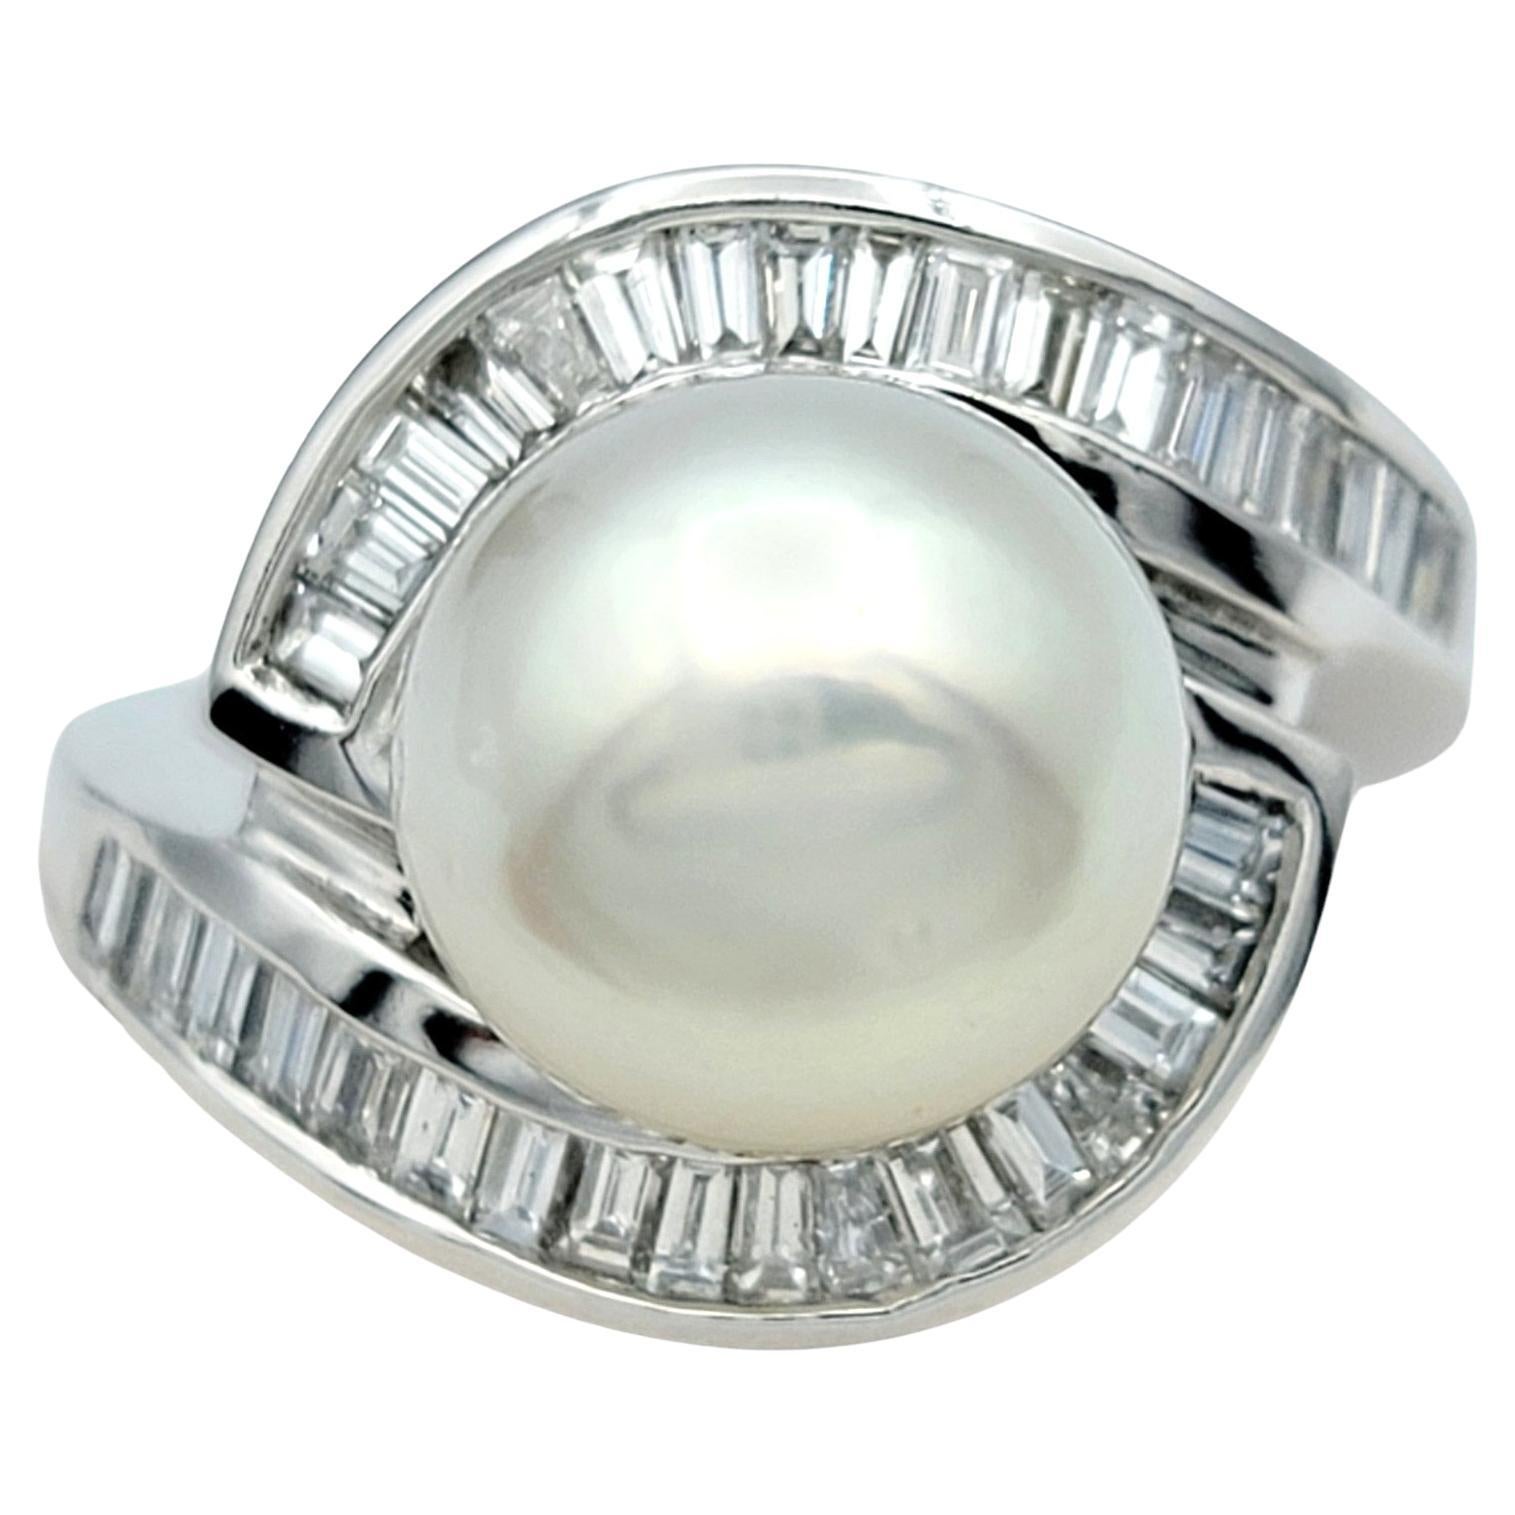 Ring Size: 6

This stunning pearl and diamond ring set in 18 karat white gold is a captivating and elegant piece of jewelry that exudes sophistication and grace. At its center rests a lustrous white Akoya pearl, renowned for its radiant sheen and